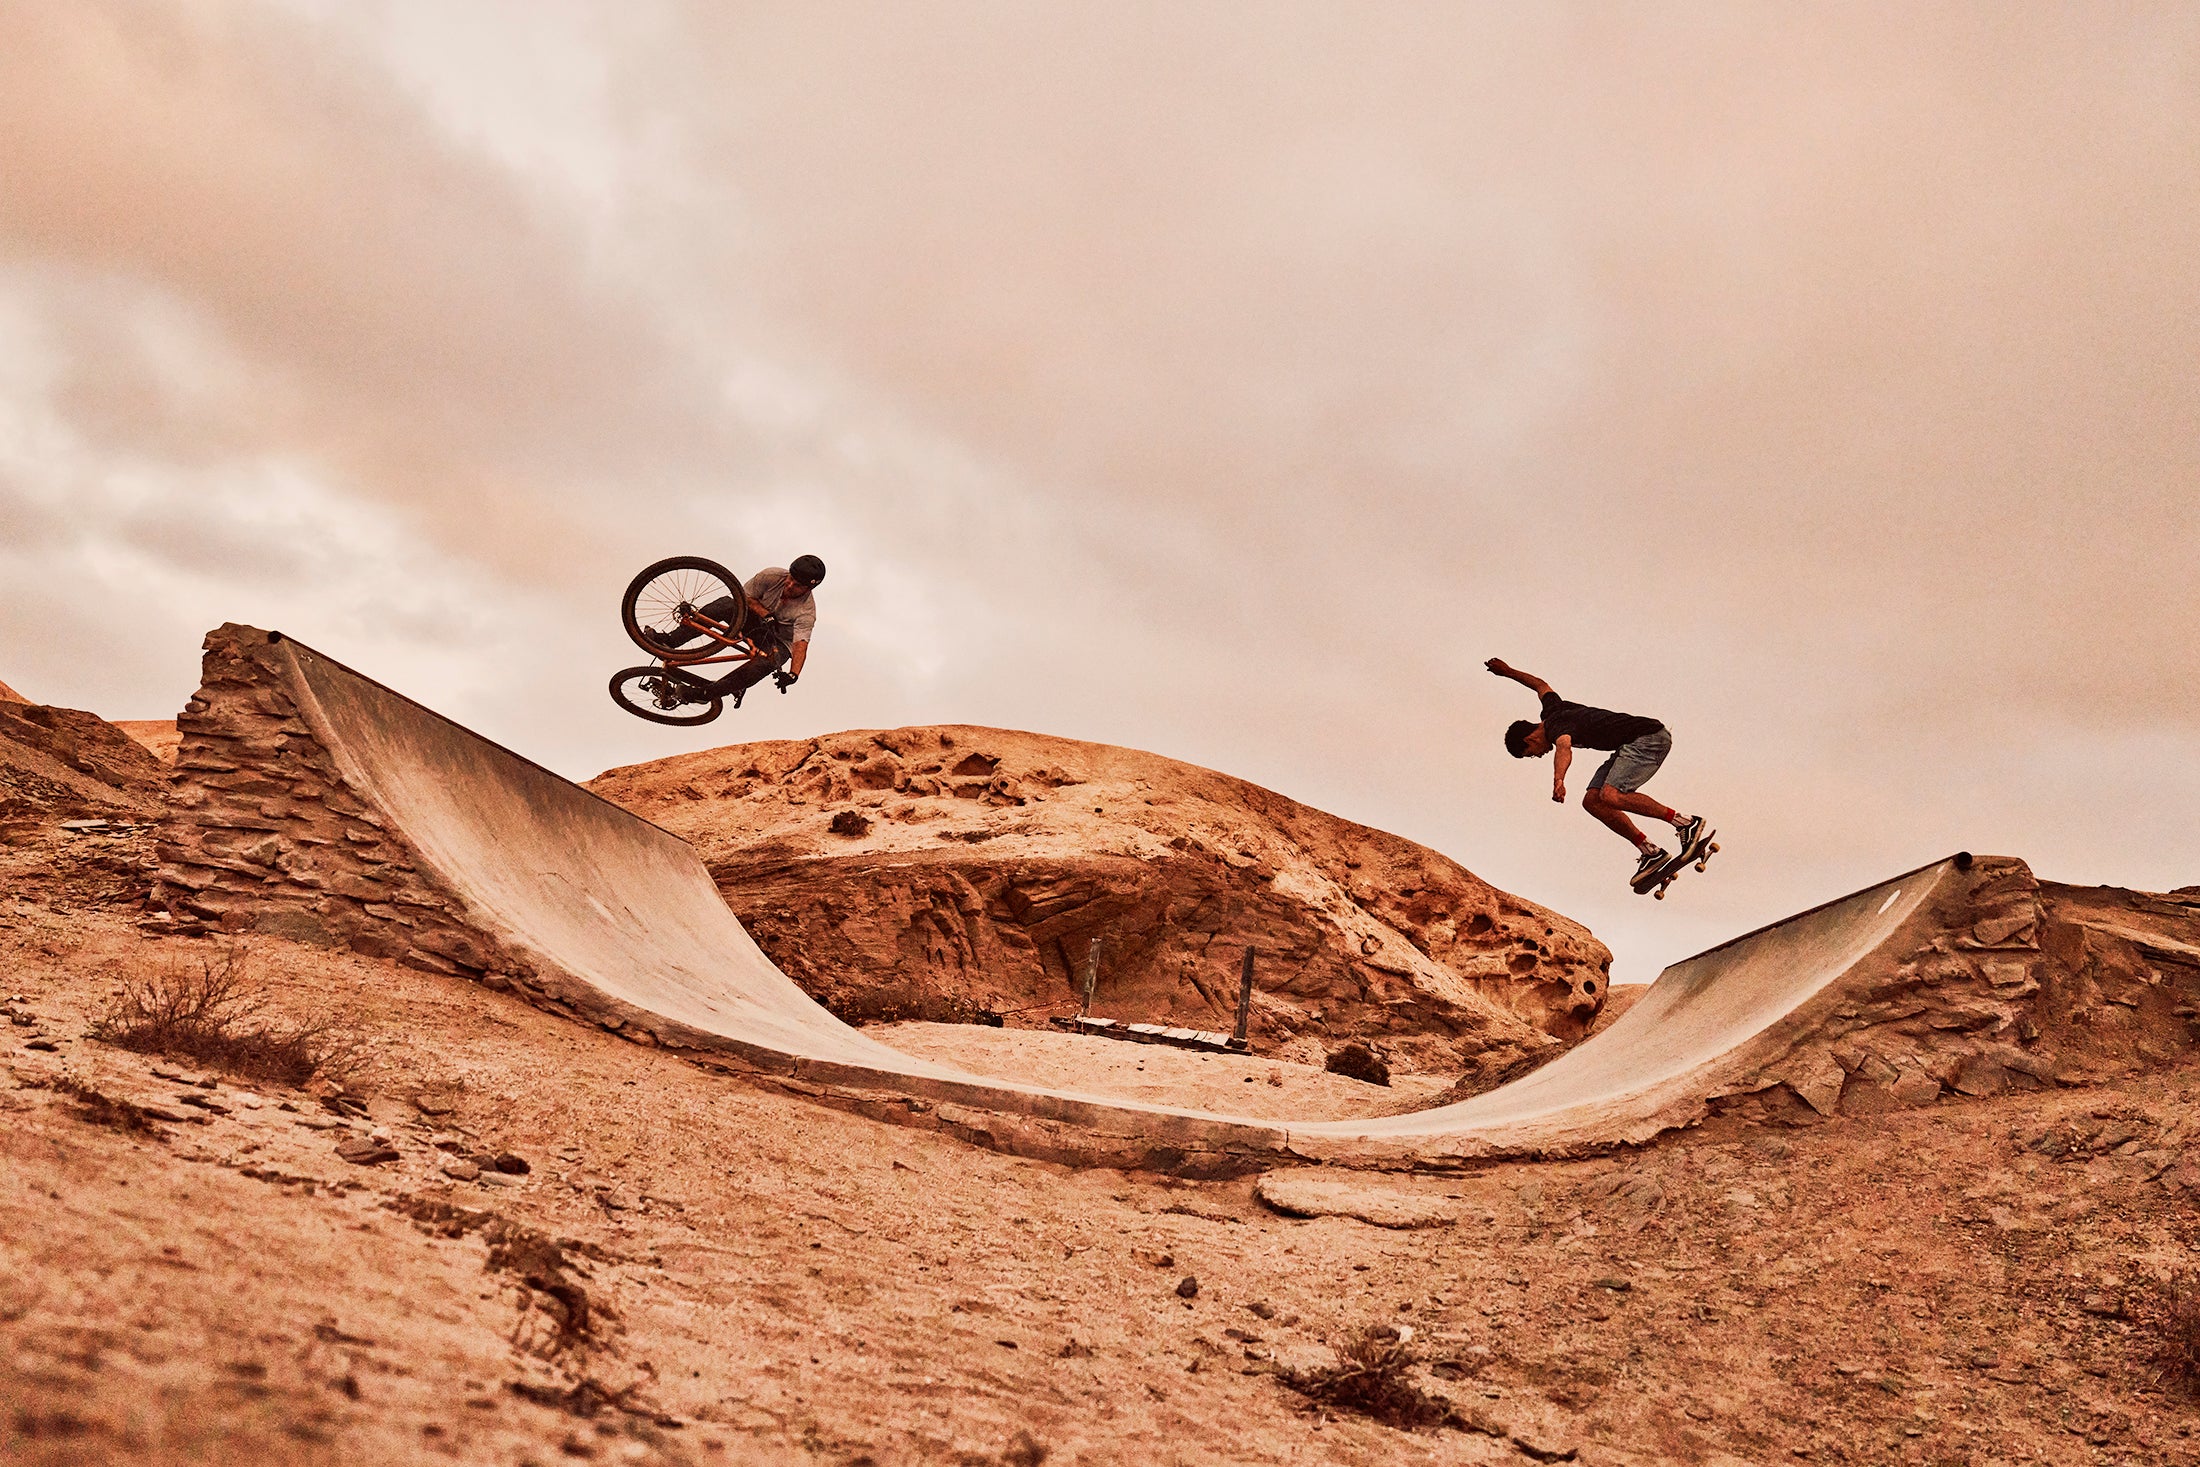 A BMX rider and skateboarder take to the air on a homemade half-pipe just outside of Swakopmund, Namibia. They are outlined against the grey cloudy coastal sky. The BMX rider is riding an ONGUZA Rooster hardtail mountain bike, with the bike horizontal in the air nearly a meter off the surface. The skateboarder throws his arms up in balance. The desert around them is dry and salt-encrusted. Photo by Ben Ingham